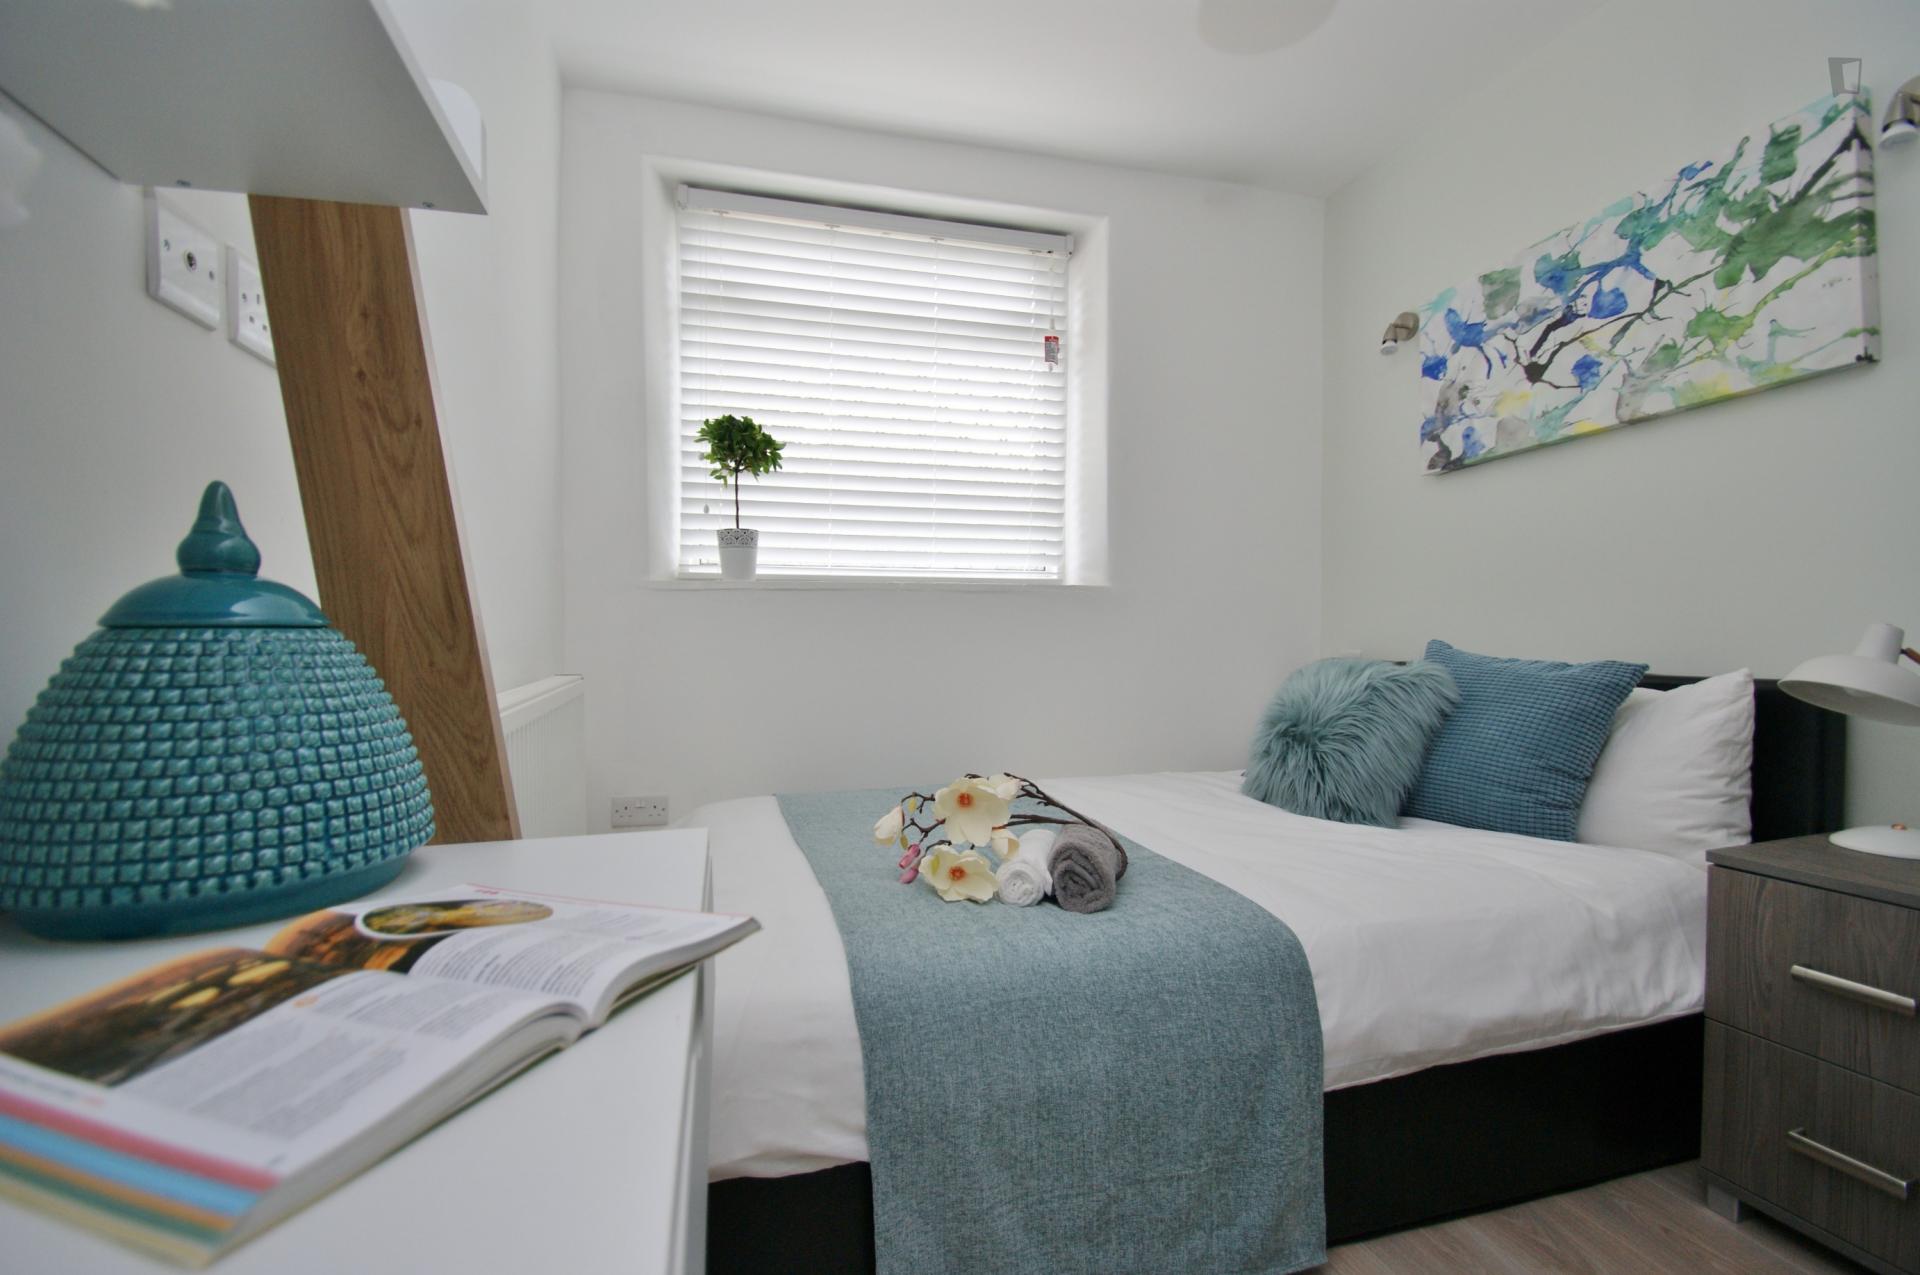 Cane Road - Double suite bedroom in London